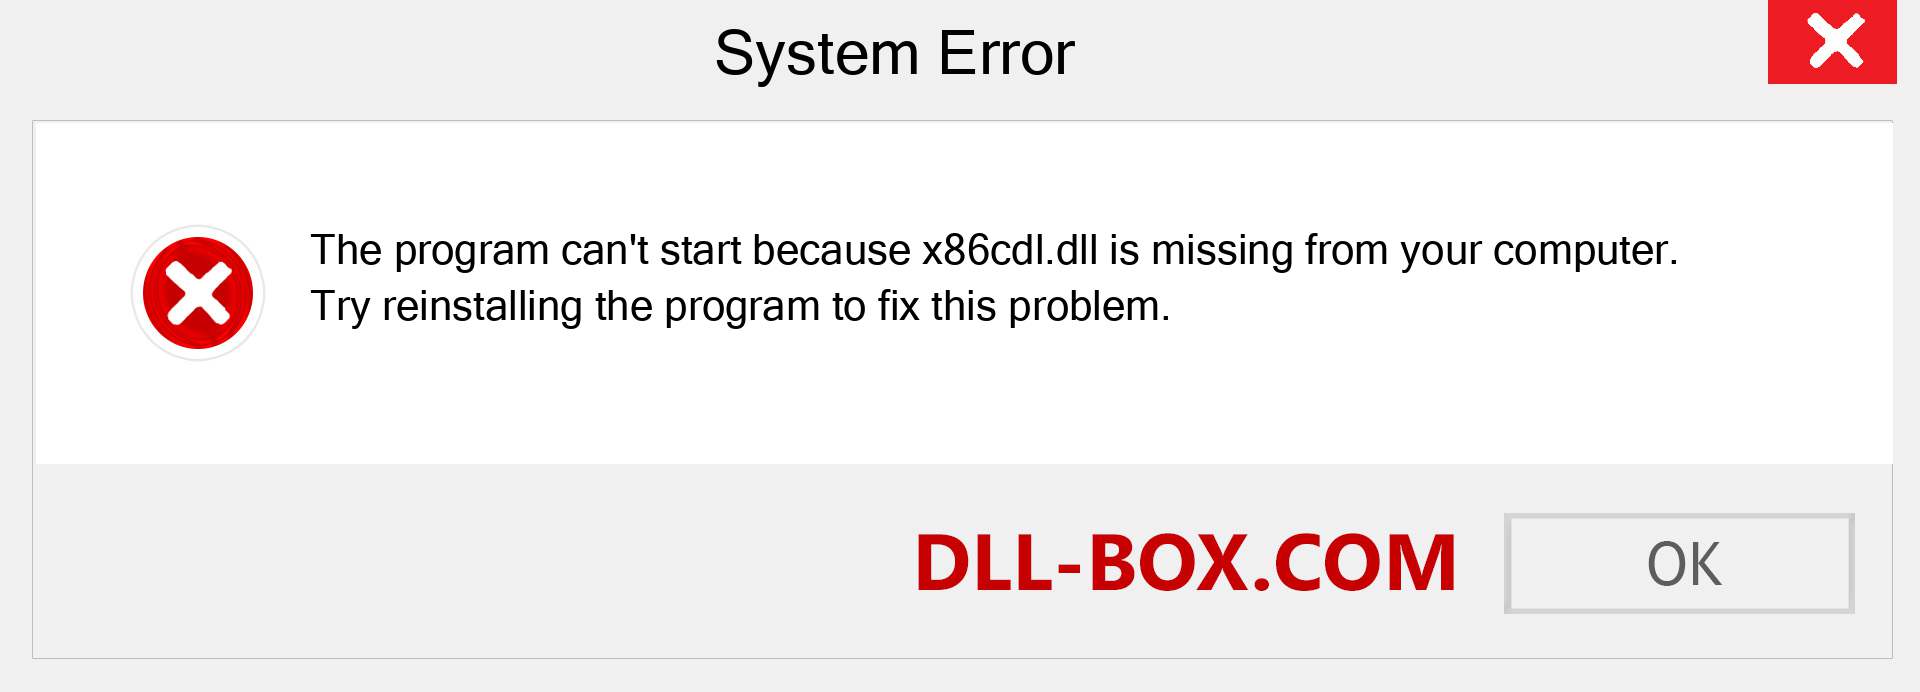  x86cdl.dll file is missing?. Download for Windows 7, 8, 10 - Fix  x86cdl dll Missing Error on Windows, photos, images